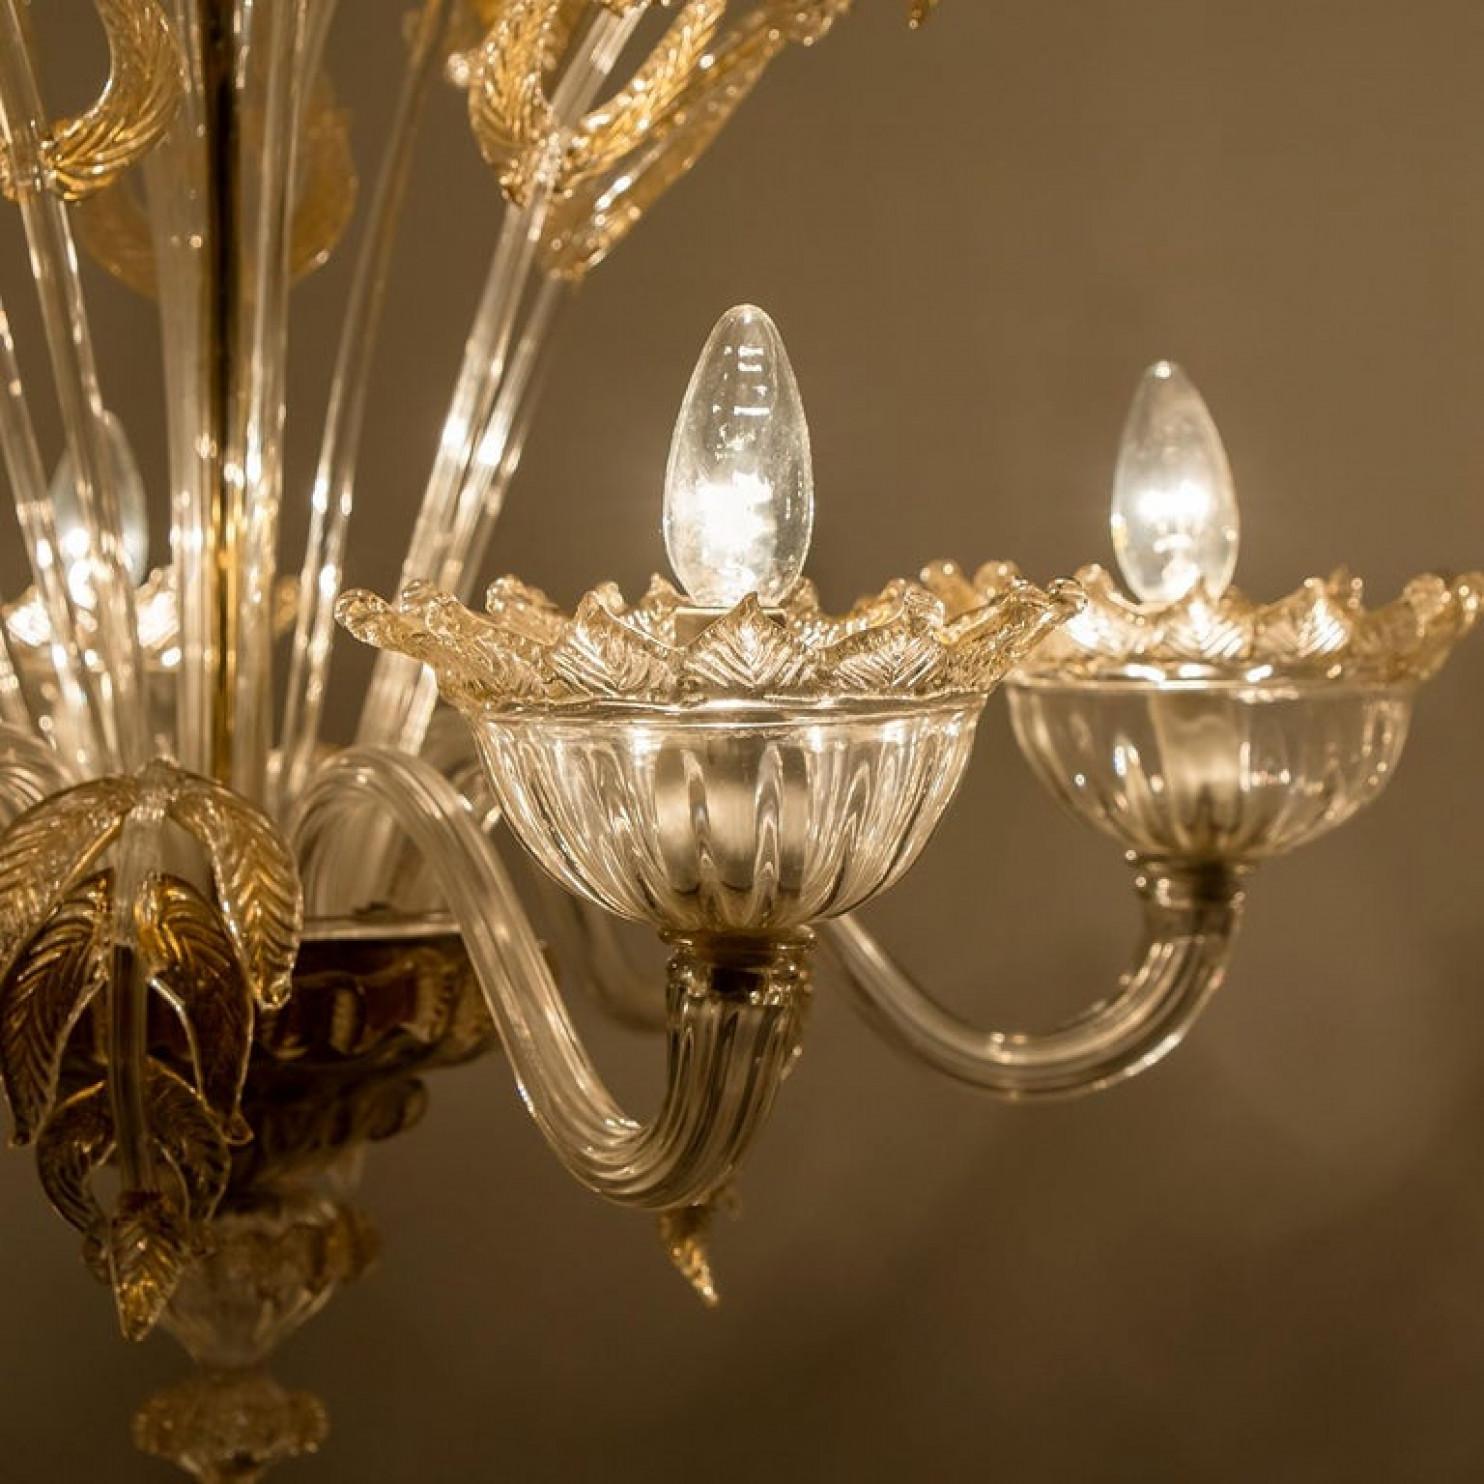 Large Venetian Chandelier in Gilded Murano Glass, by Barovier, 1950s For Sale 9